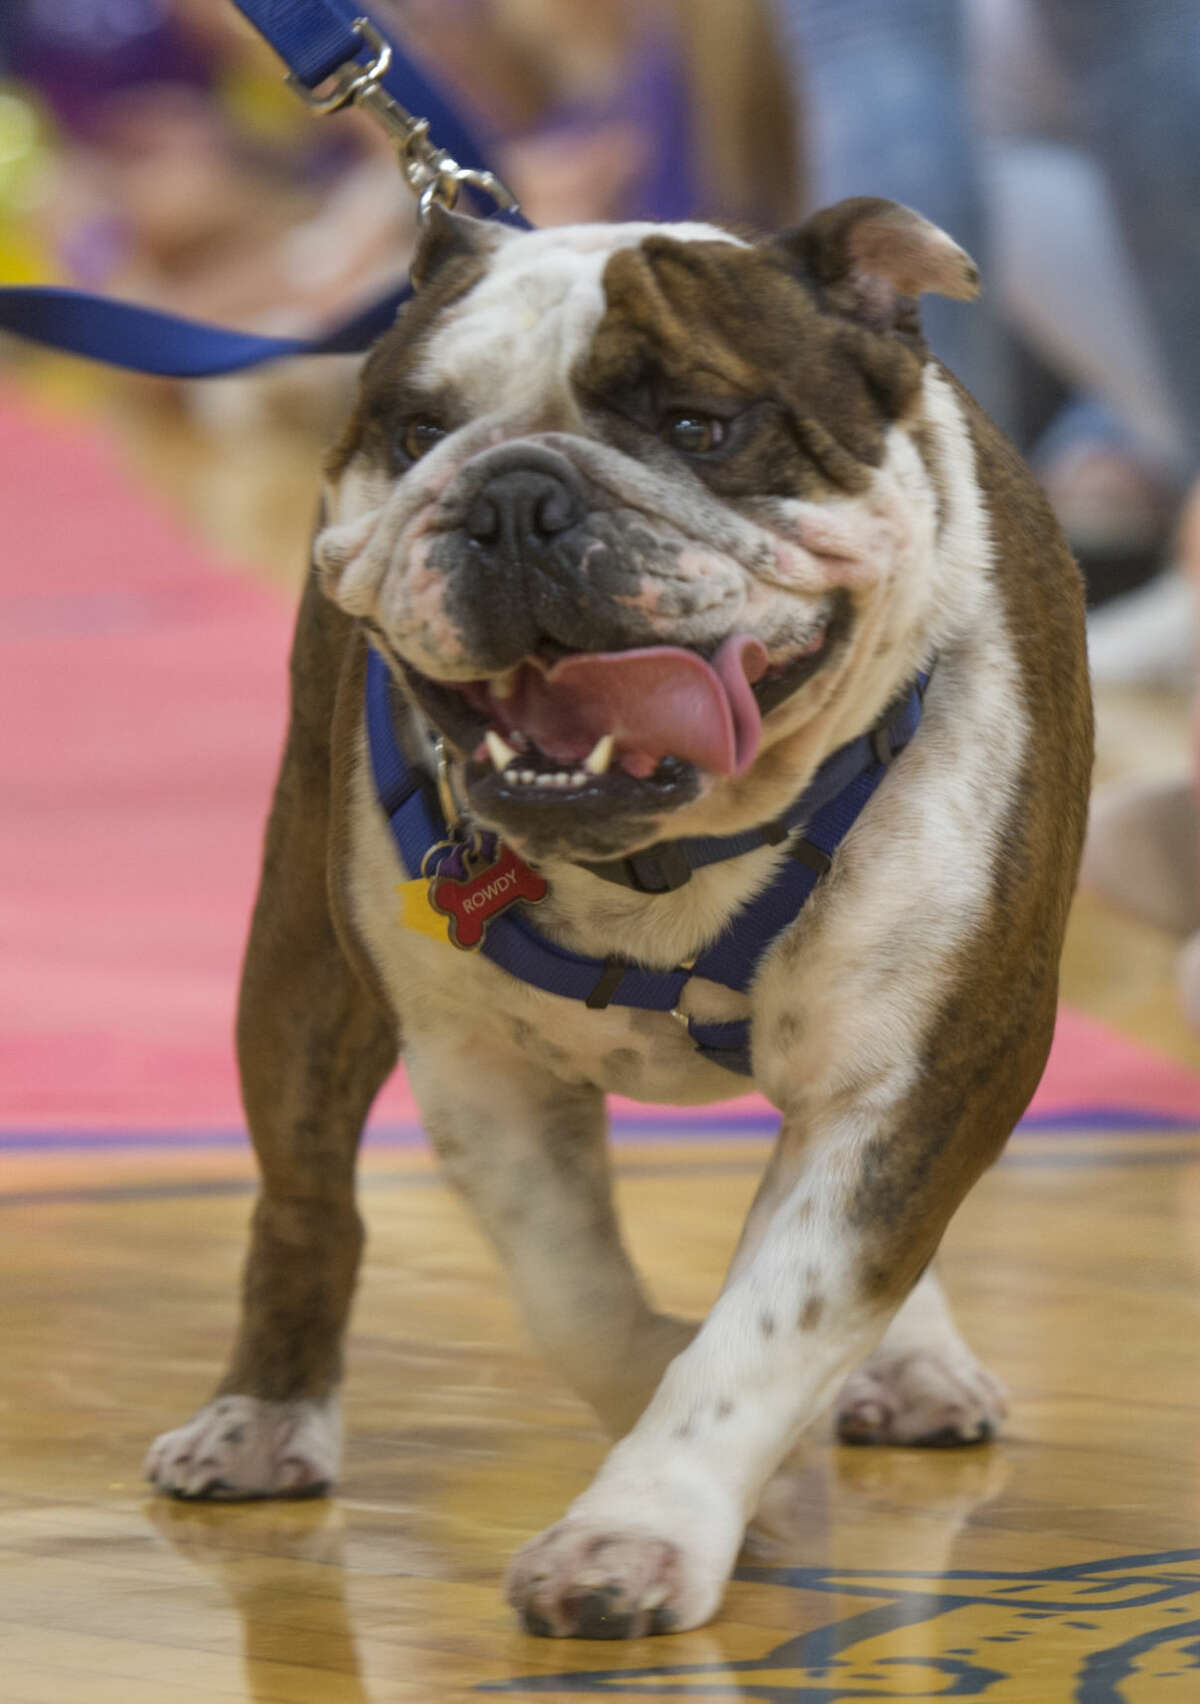 Rowdy walks out Friday 09-23-16 during the annual Bulldog Beauty Pageant at Midland Freshman to pick a mascot for the class. Tim Fischer/Reporter-Telegram